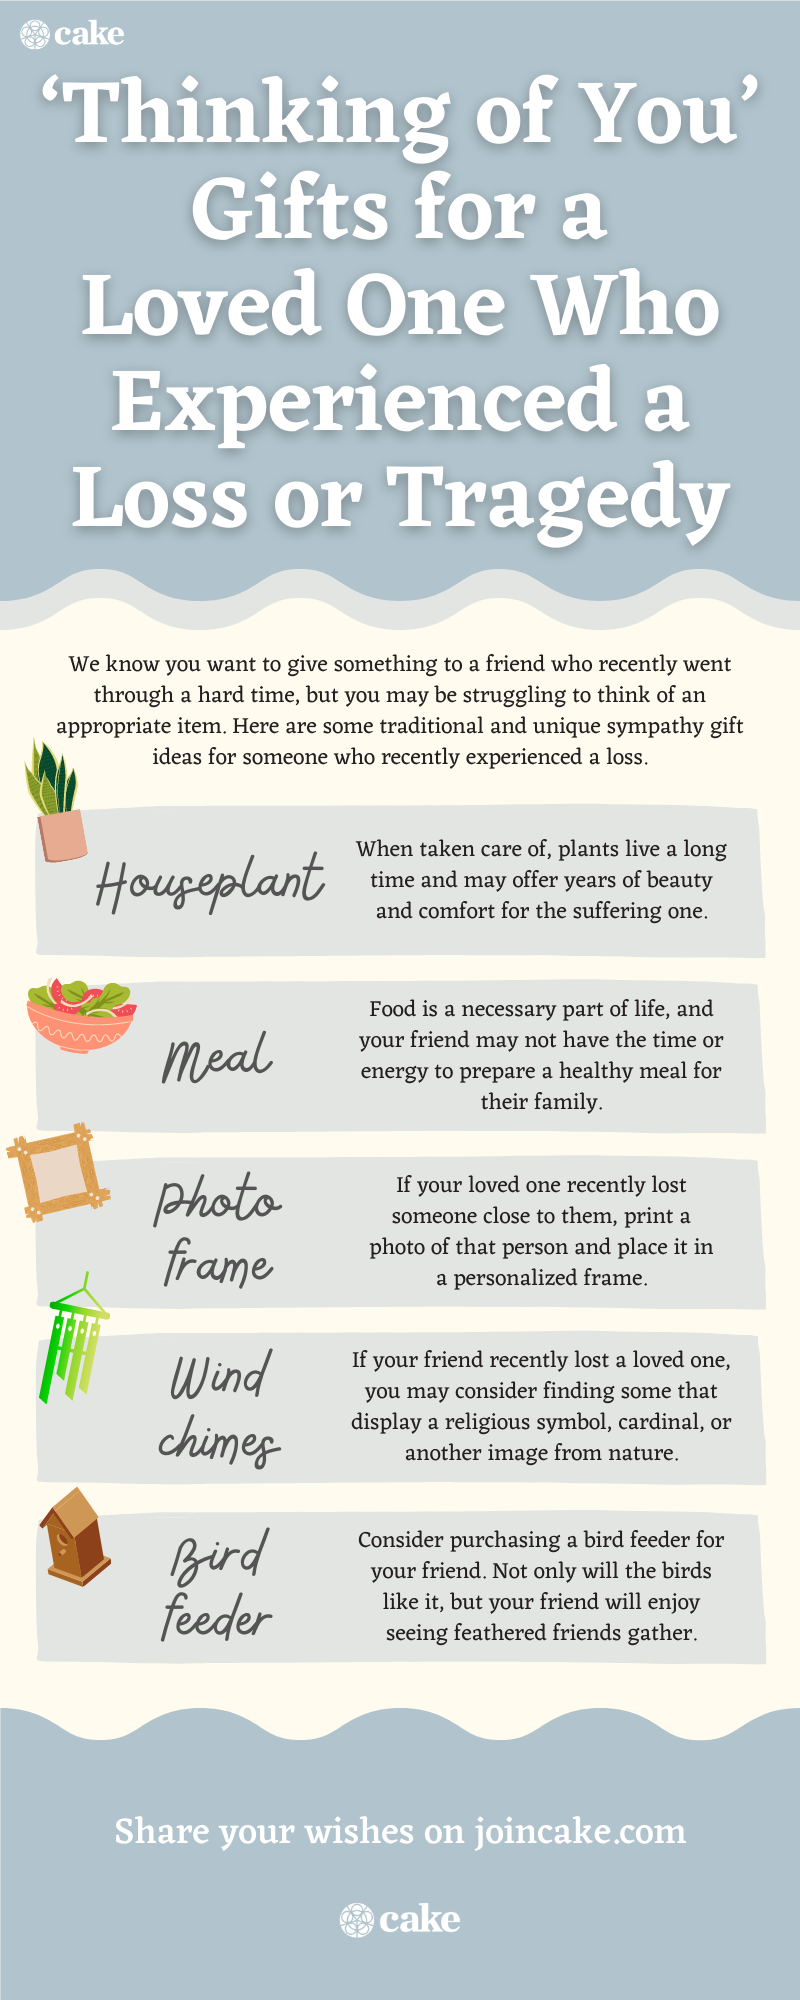 Infographic with a list of gifts for someone who experienced a loss or tragedy